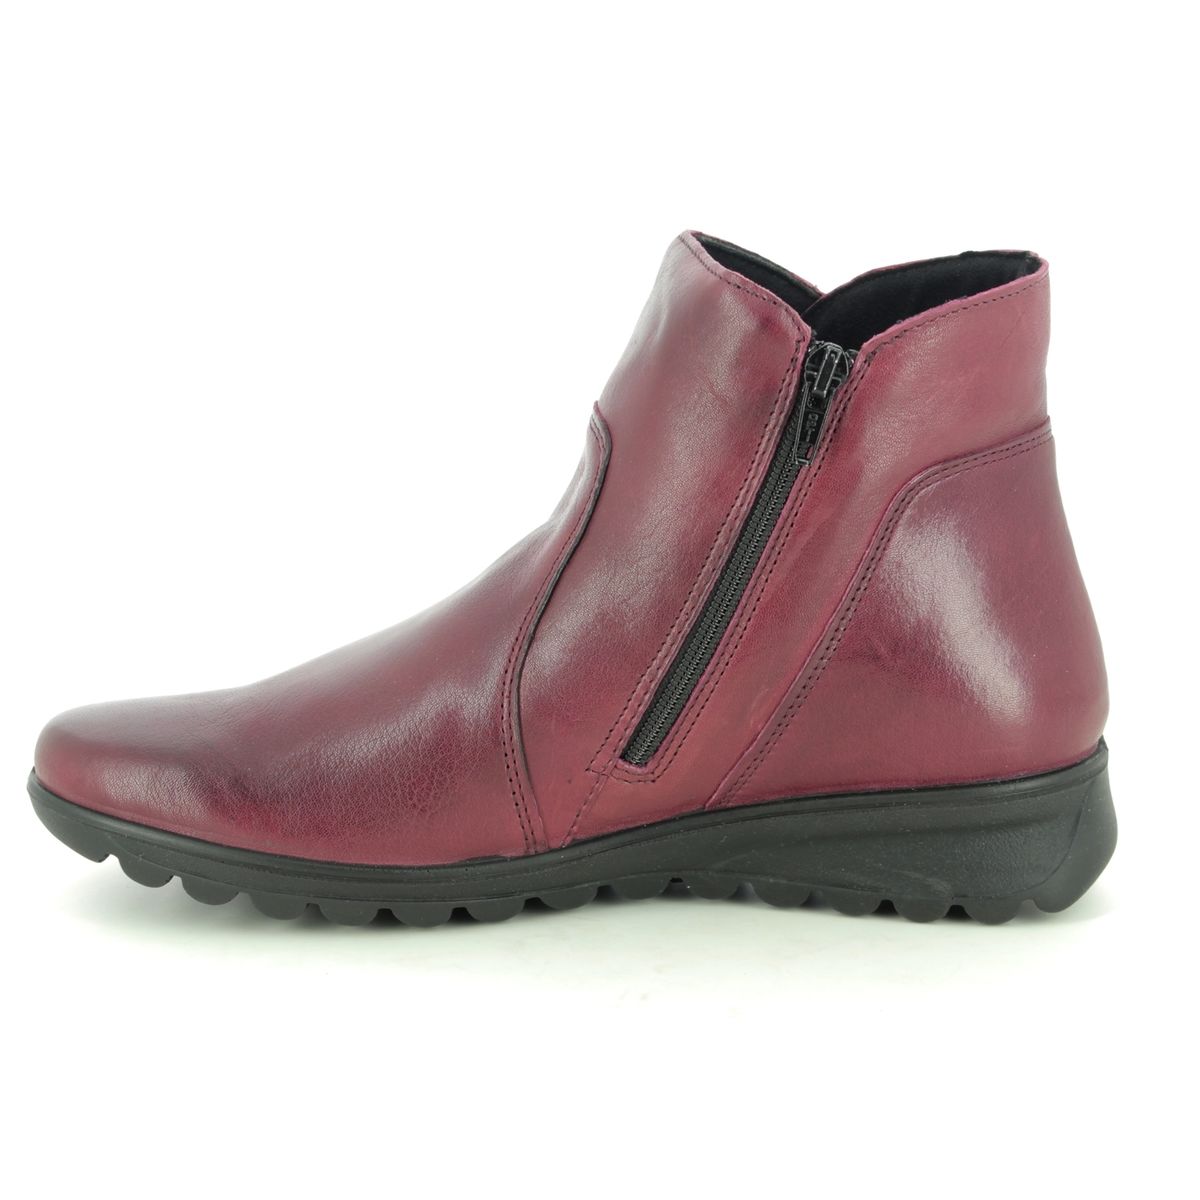 IMAC Karen Boot 7520-54178019 Red leather Ankle Boots